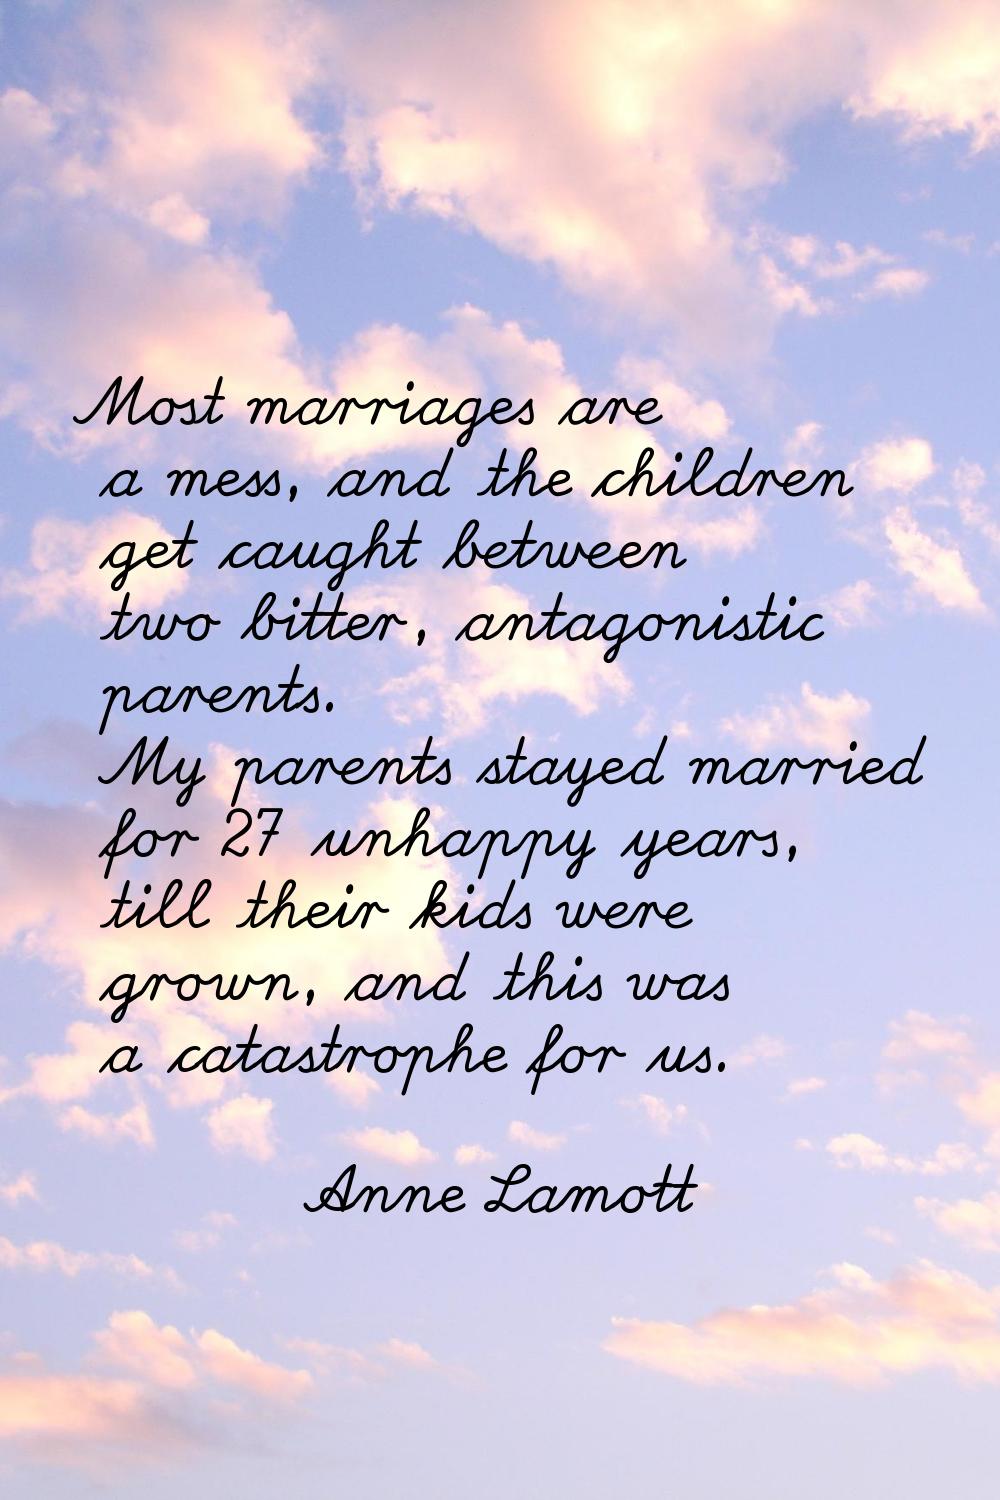 Most marriages are a mess, and the children get caught between two bitter, antagonistic parents. My